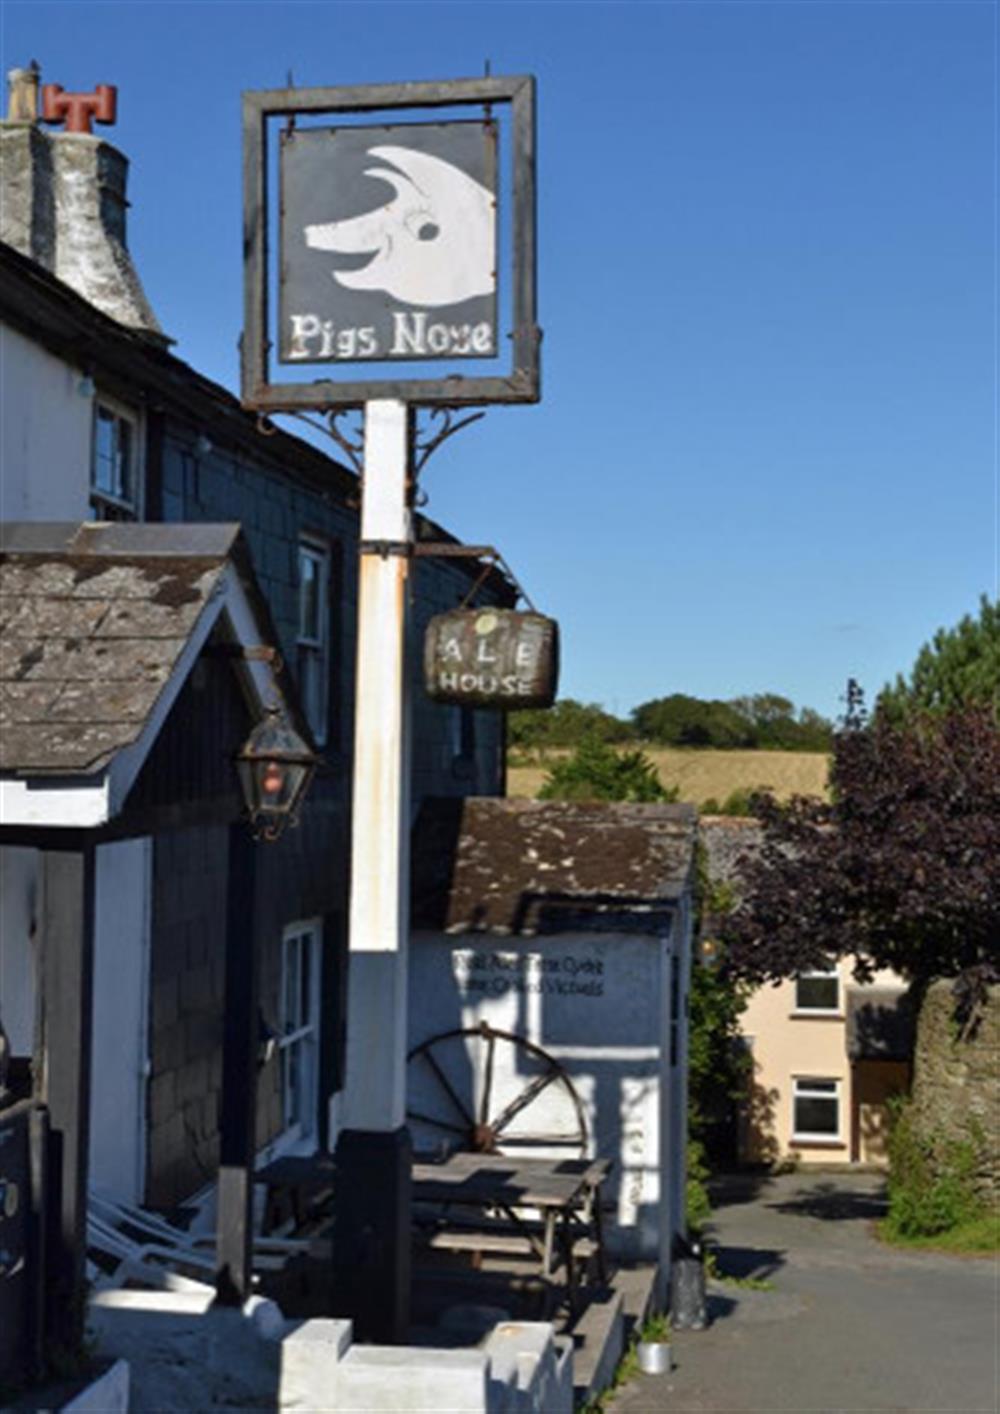 The welcoming Pigs Nose pub in the nearby village of East Prawle.